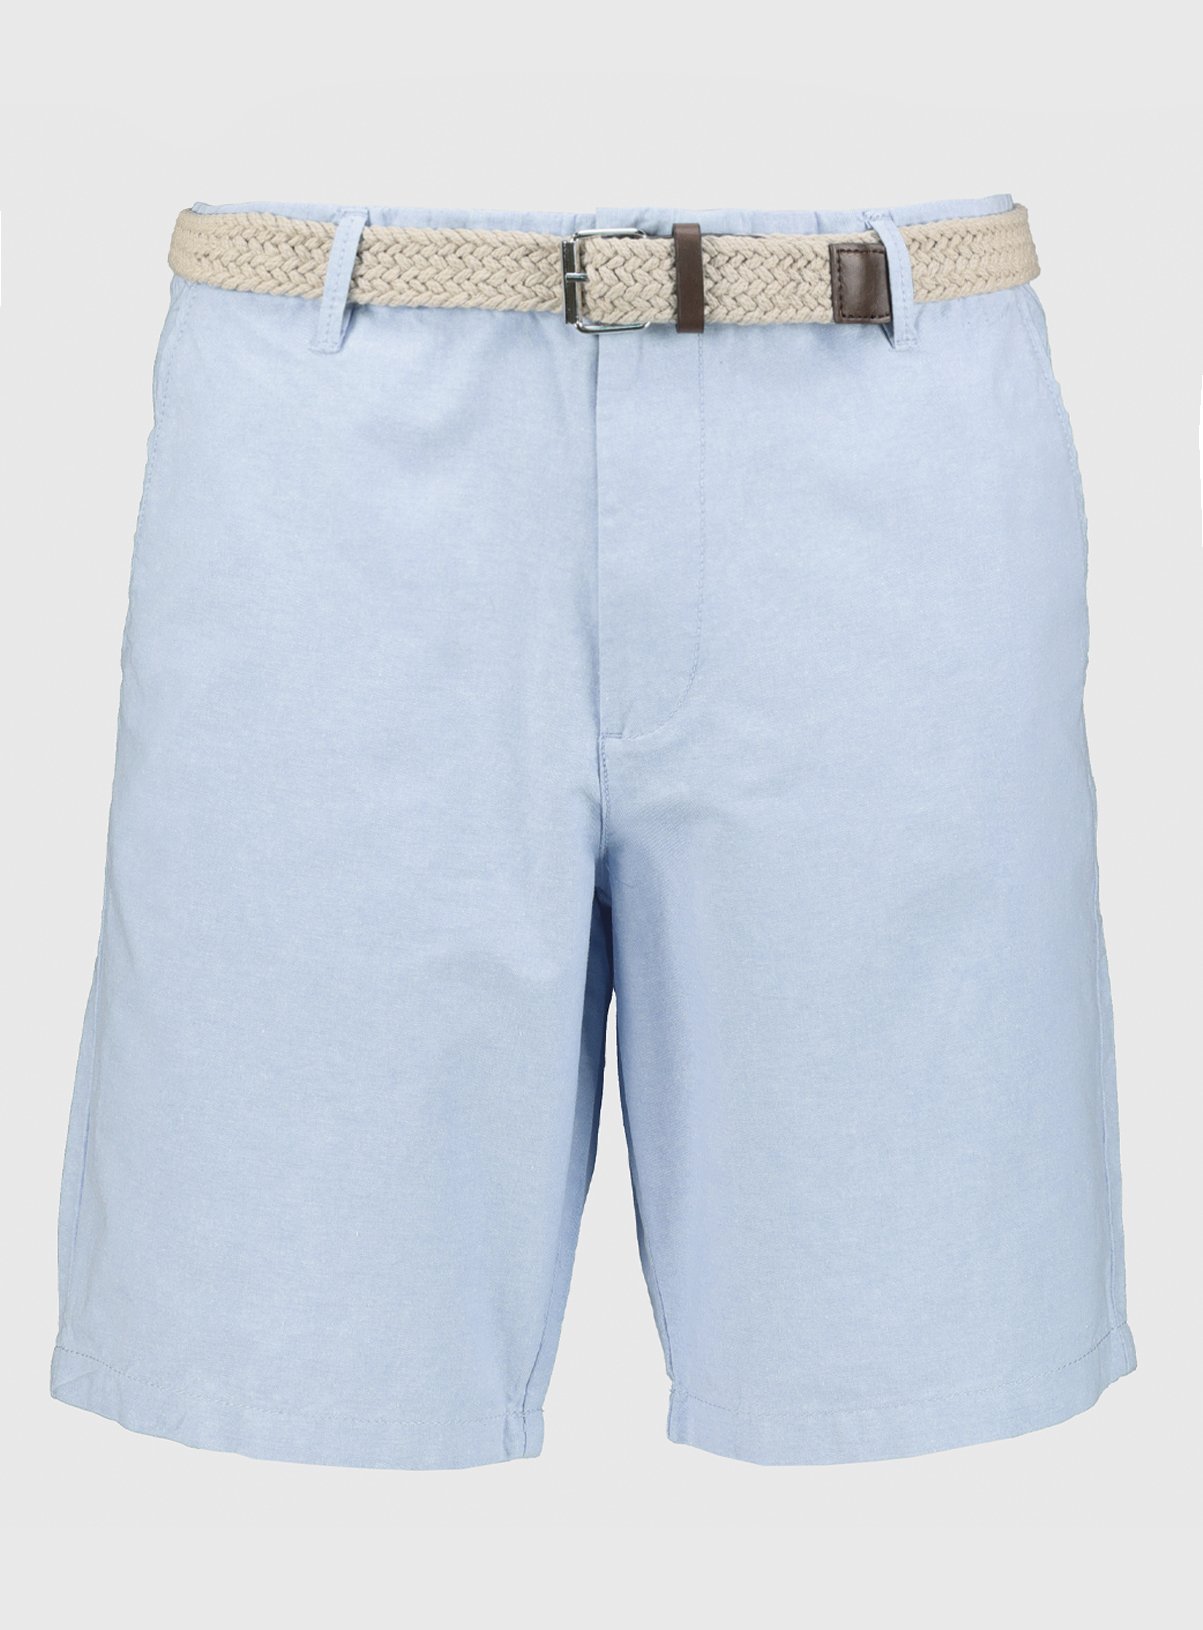 Pale Blue Belted Oxford Chino Shorts Review